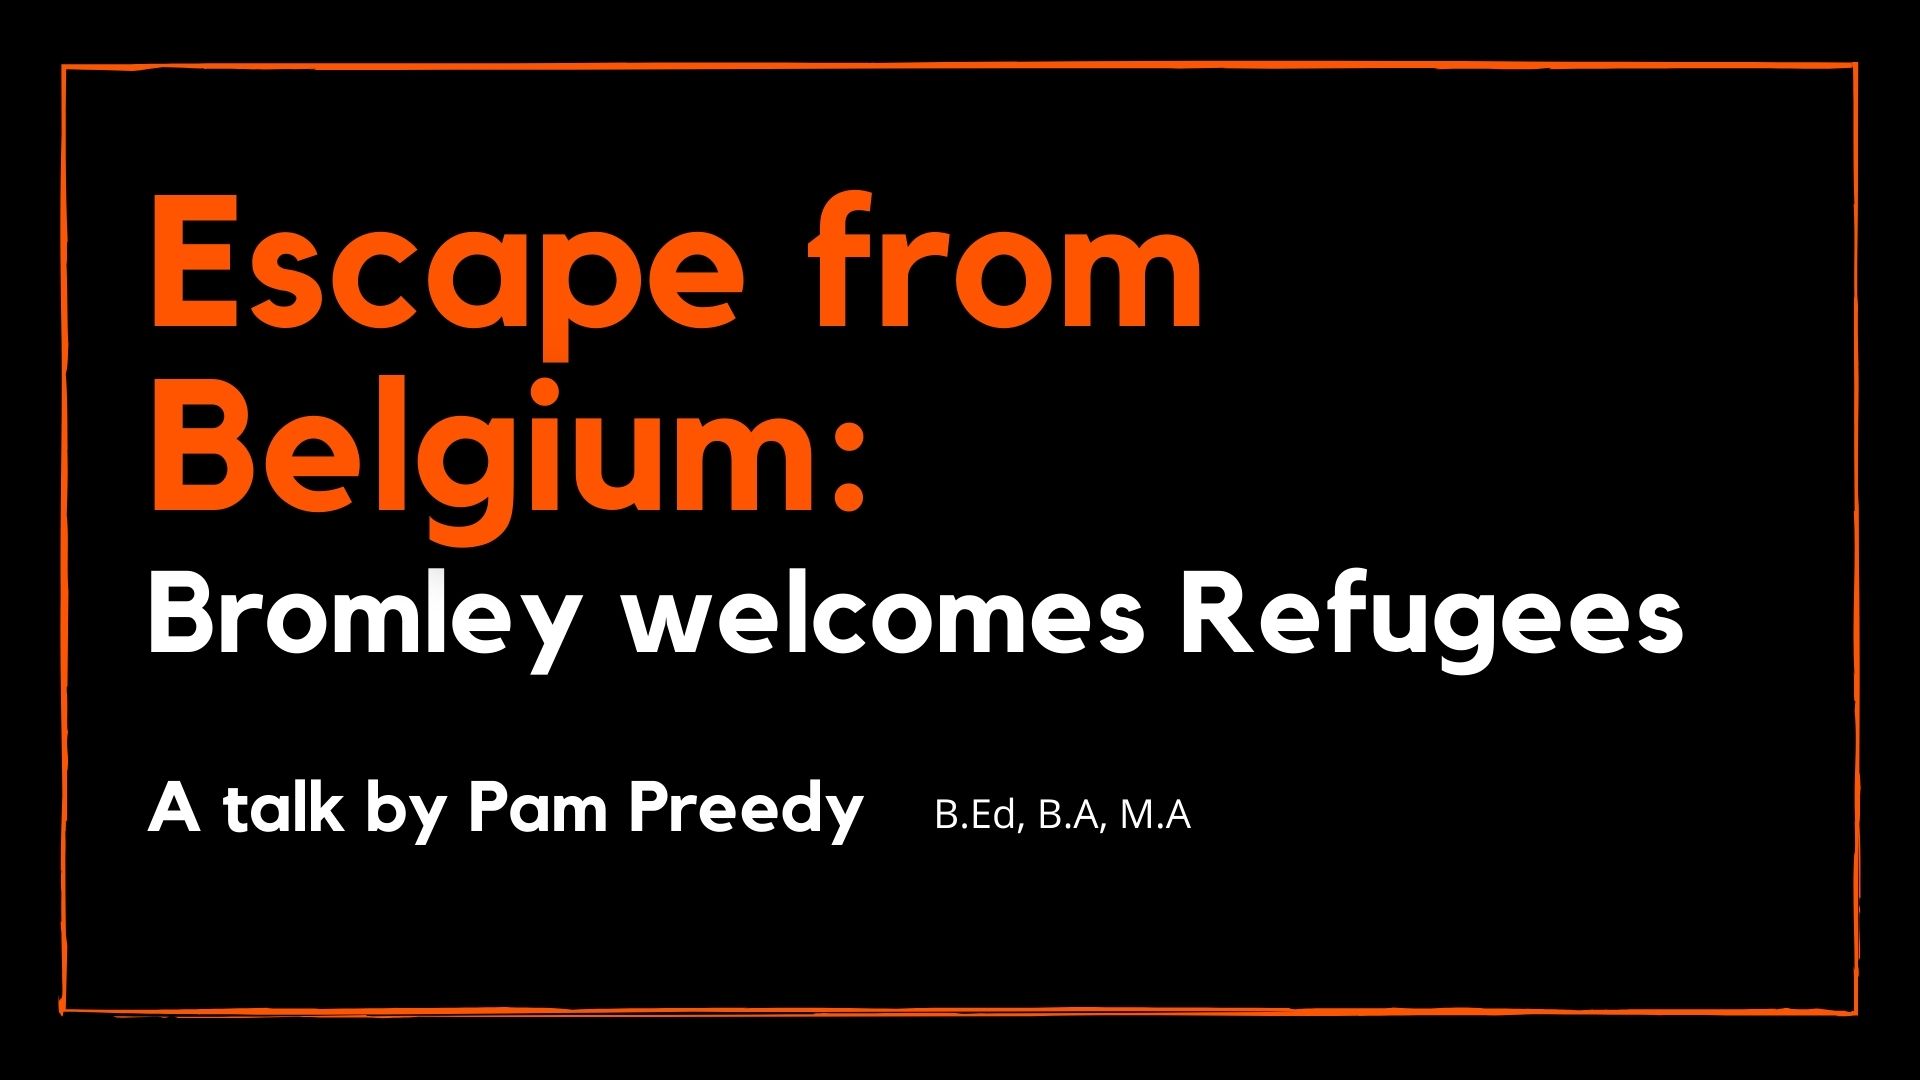 Escape from Belgium: Bromley Welcomes Refugees talk by Pam Preedy